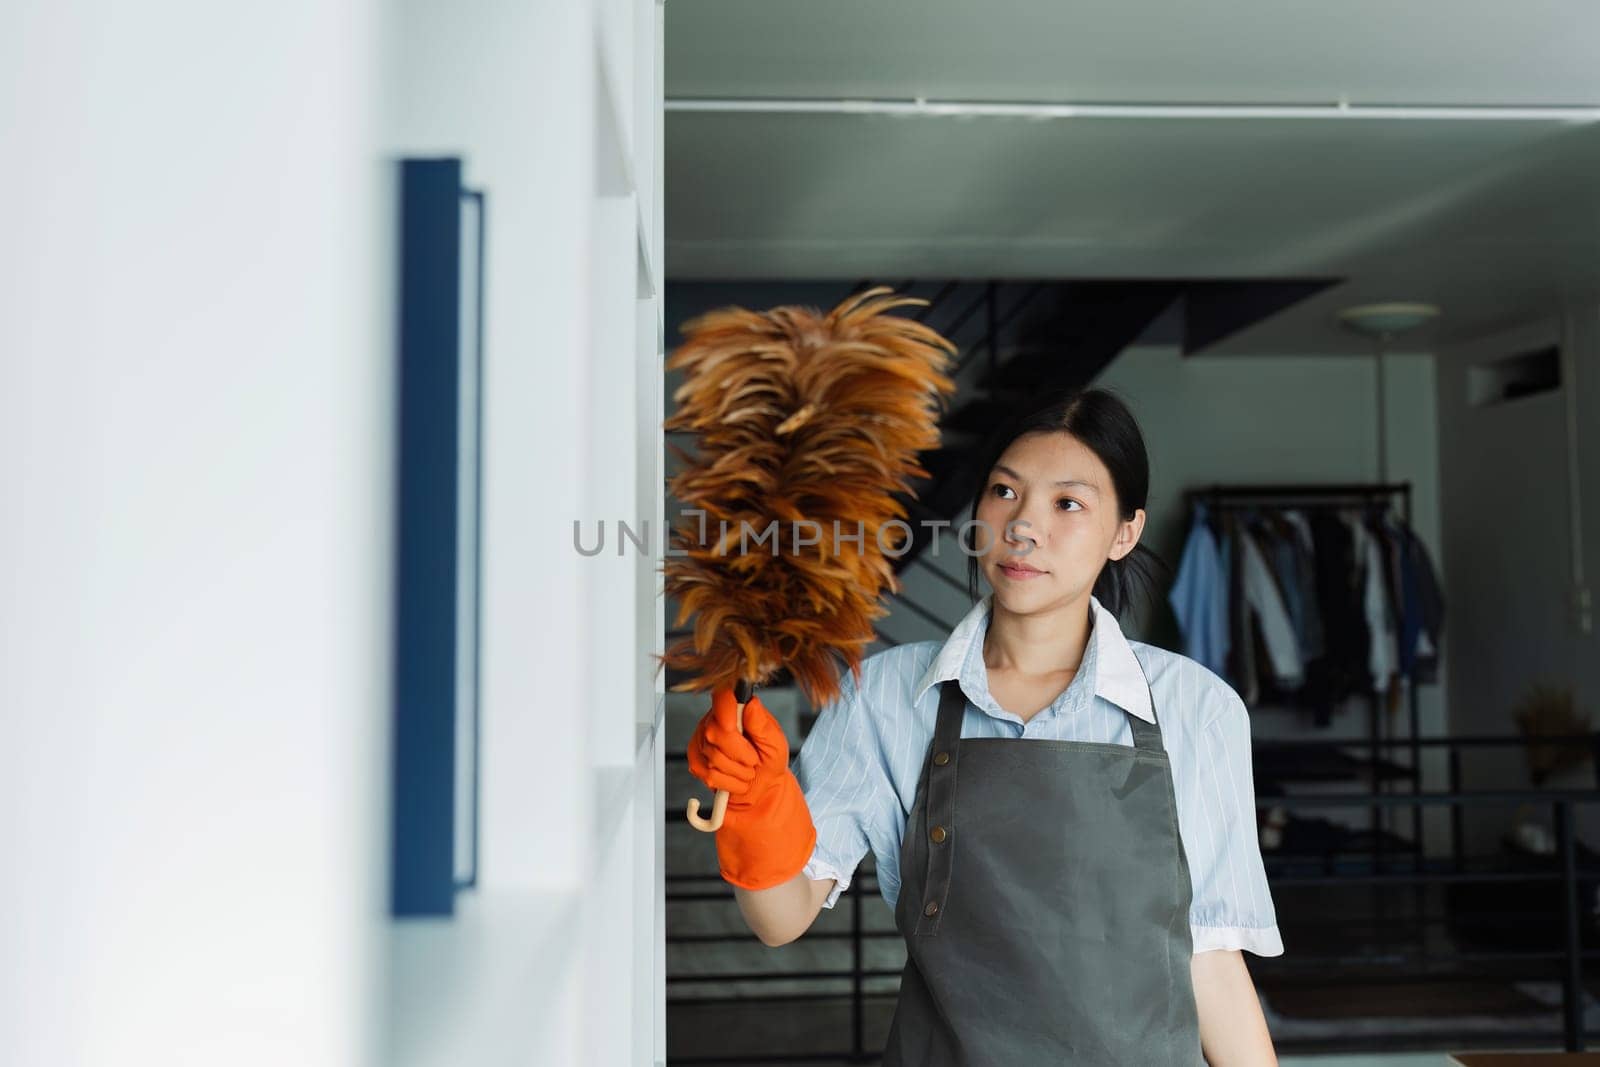 Female housekeeper smile and wearing glove, preparing to clean office.